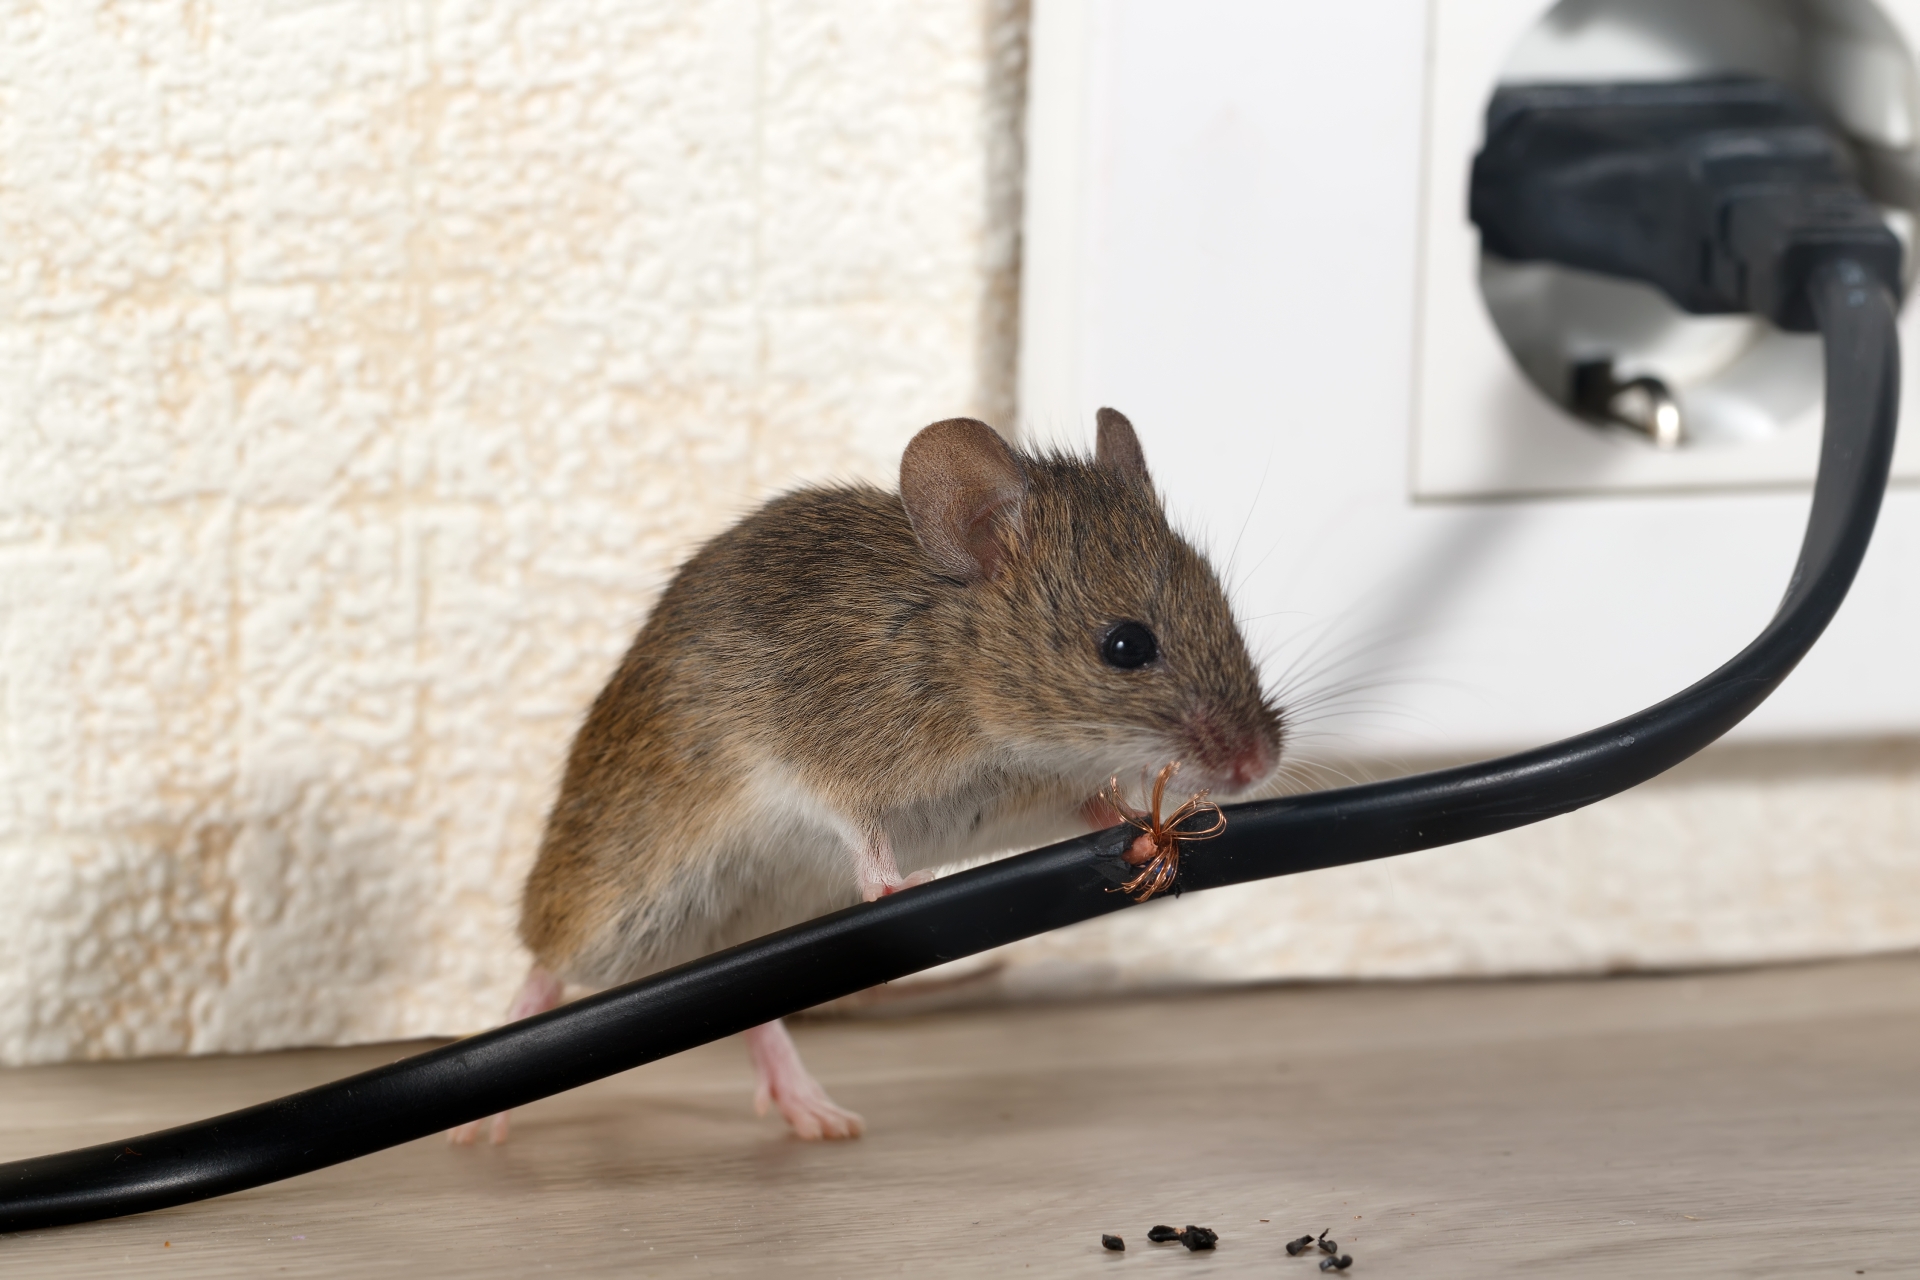 Mice Infestation, Pest Control in Borehamwood, Elstree, Well End, WD6. Call Now 020 8166 9746